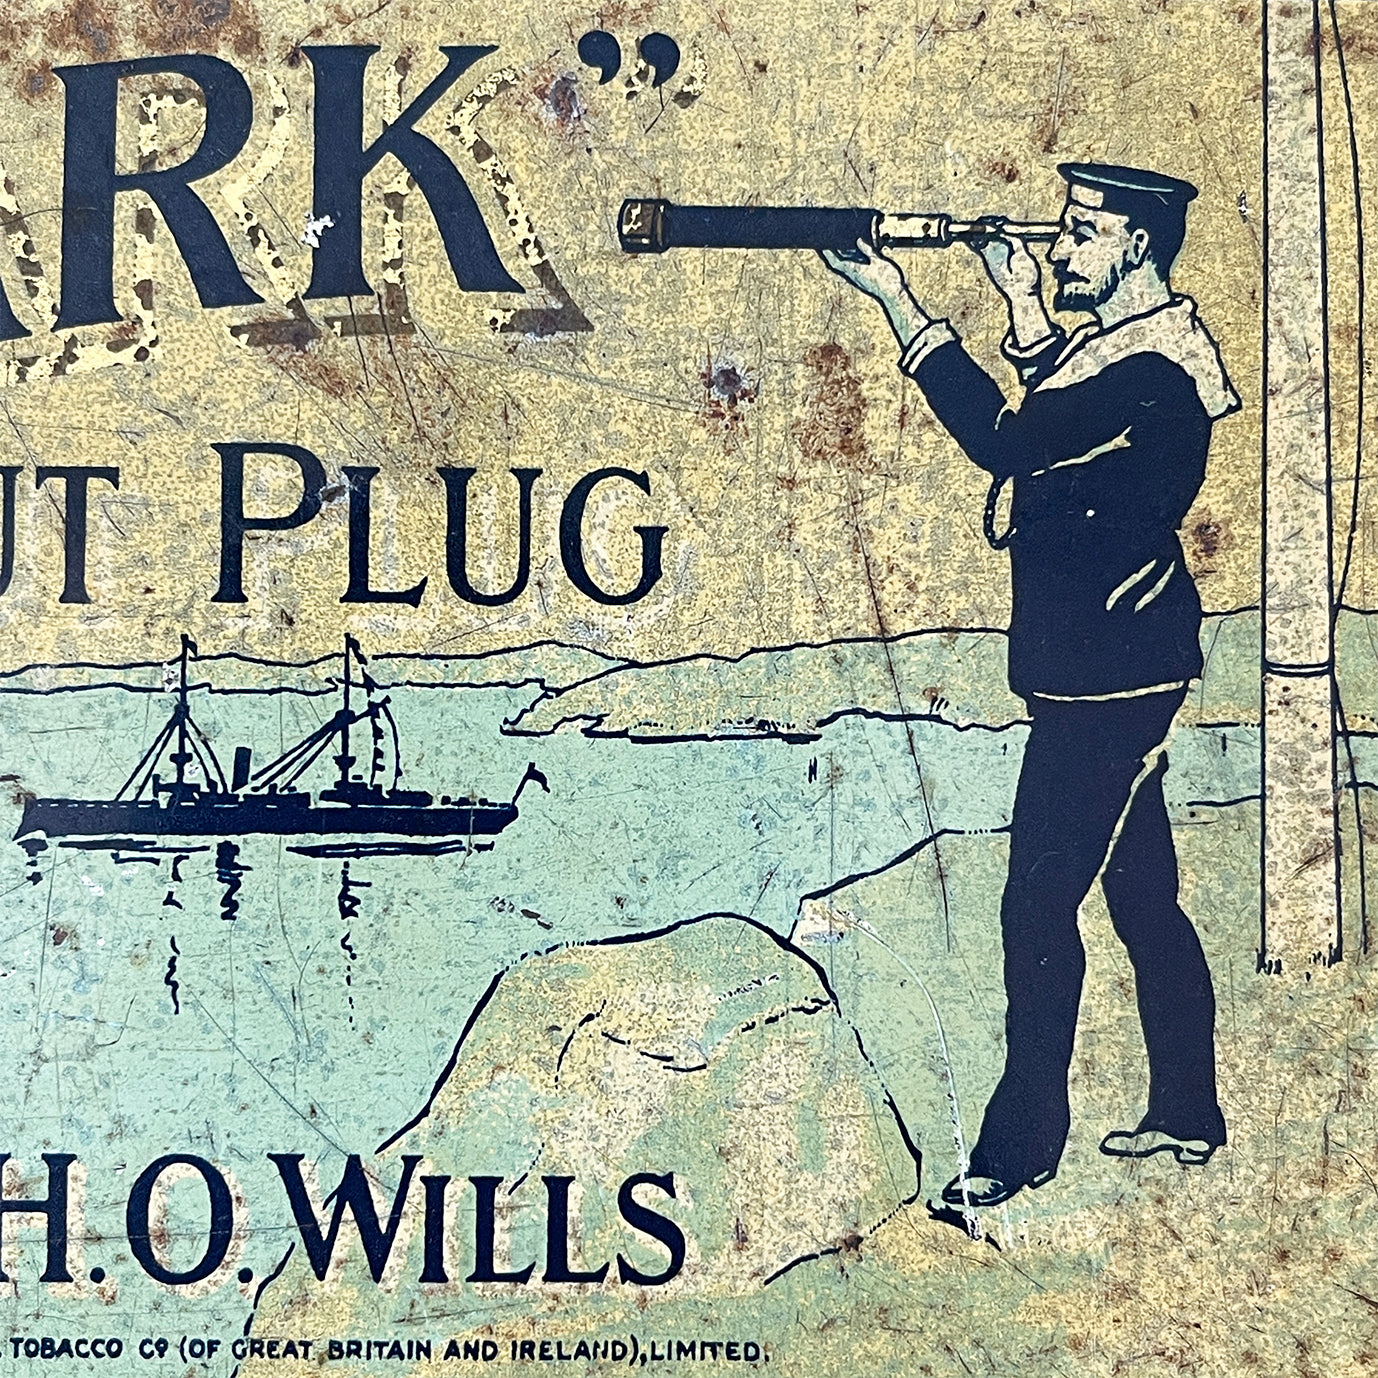 Vintage Bulwark Cut Plug Tobacco Tin from W.D & H.O Wills, that would have held 1LB of tobacco. Great graphics to the front, sides with drilled air holes as part of the tin design. 